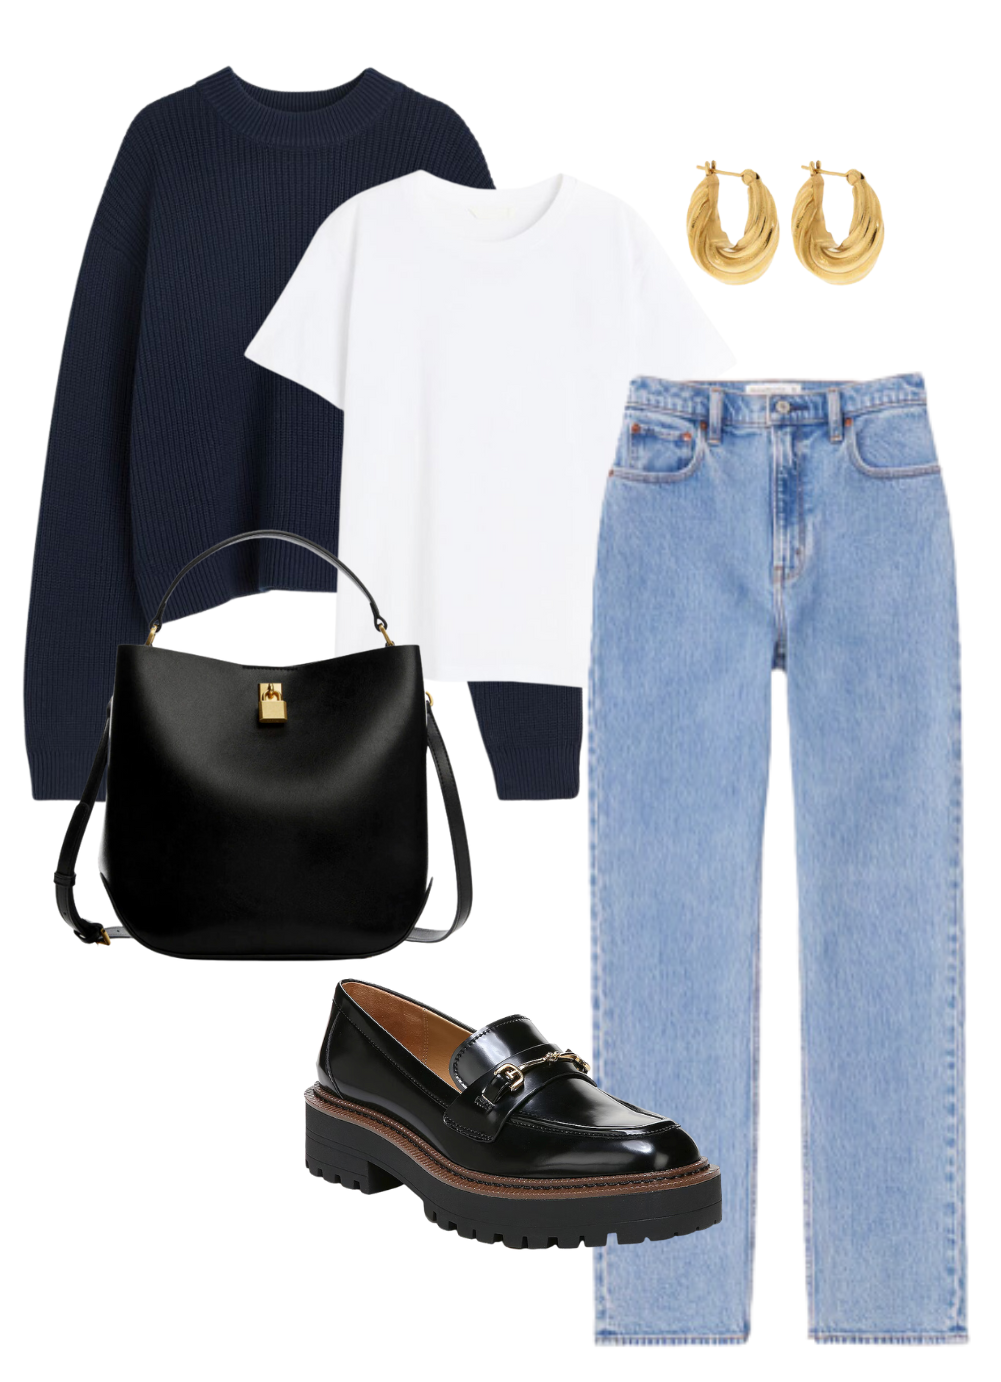 navy sweater, white t shirt, black purse, gold earrings, blue jeans, black loafers